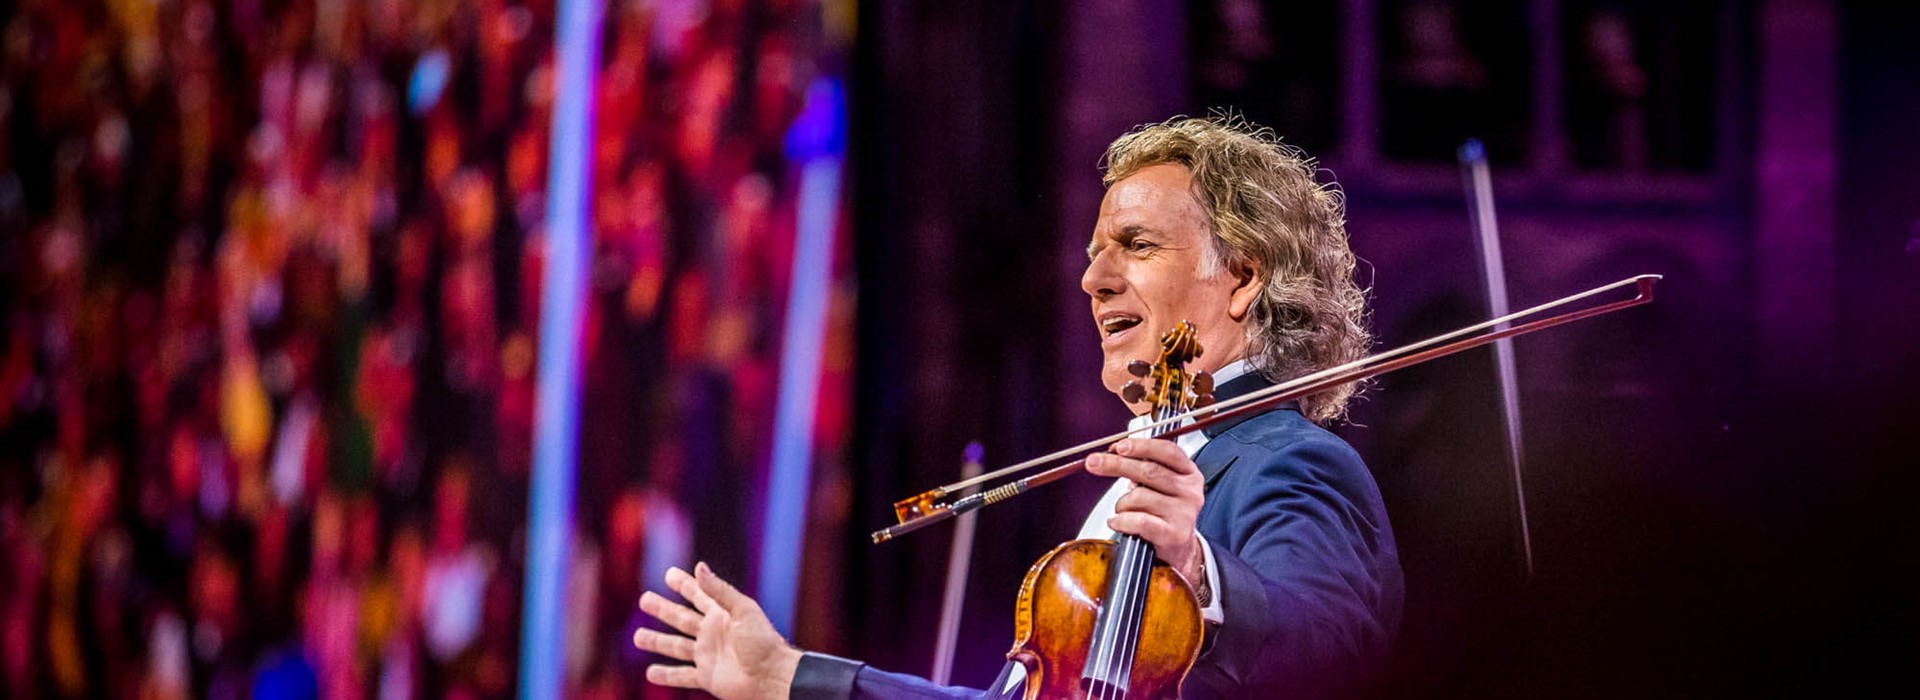 tourhub | Newmarket Holidays | Andre Rieu in Maastricht by Air - 5 days | 18874